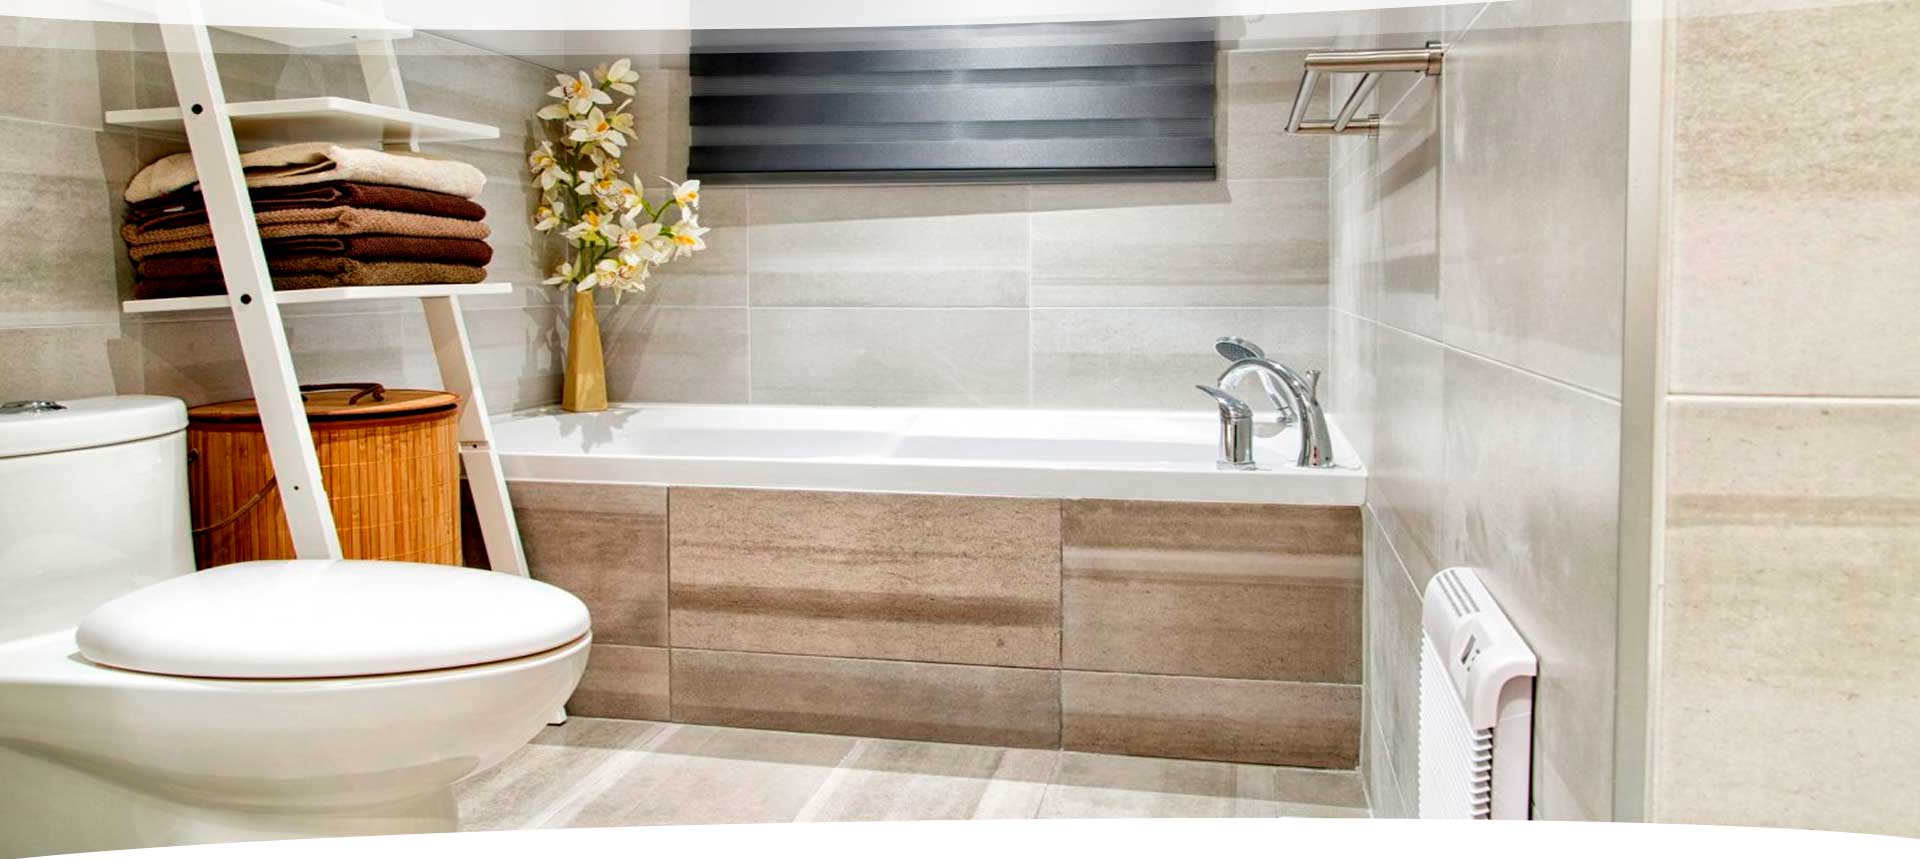 Fiberglass Bathtubs and Showers Repairs in West Palm Beach